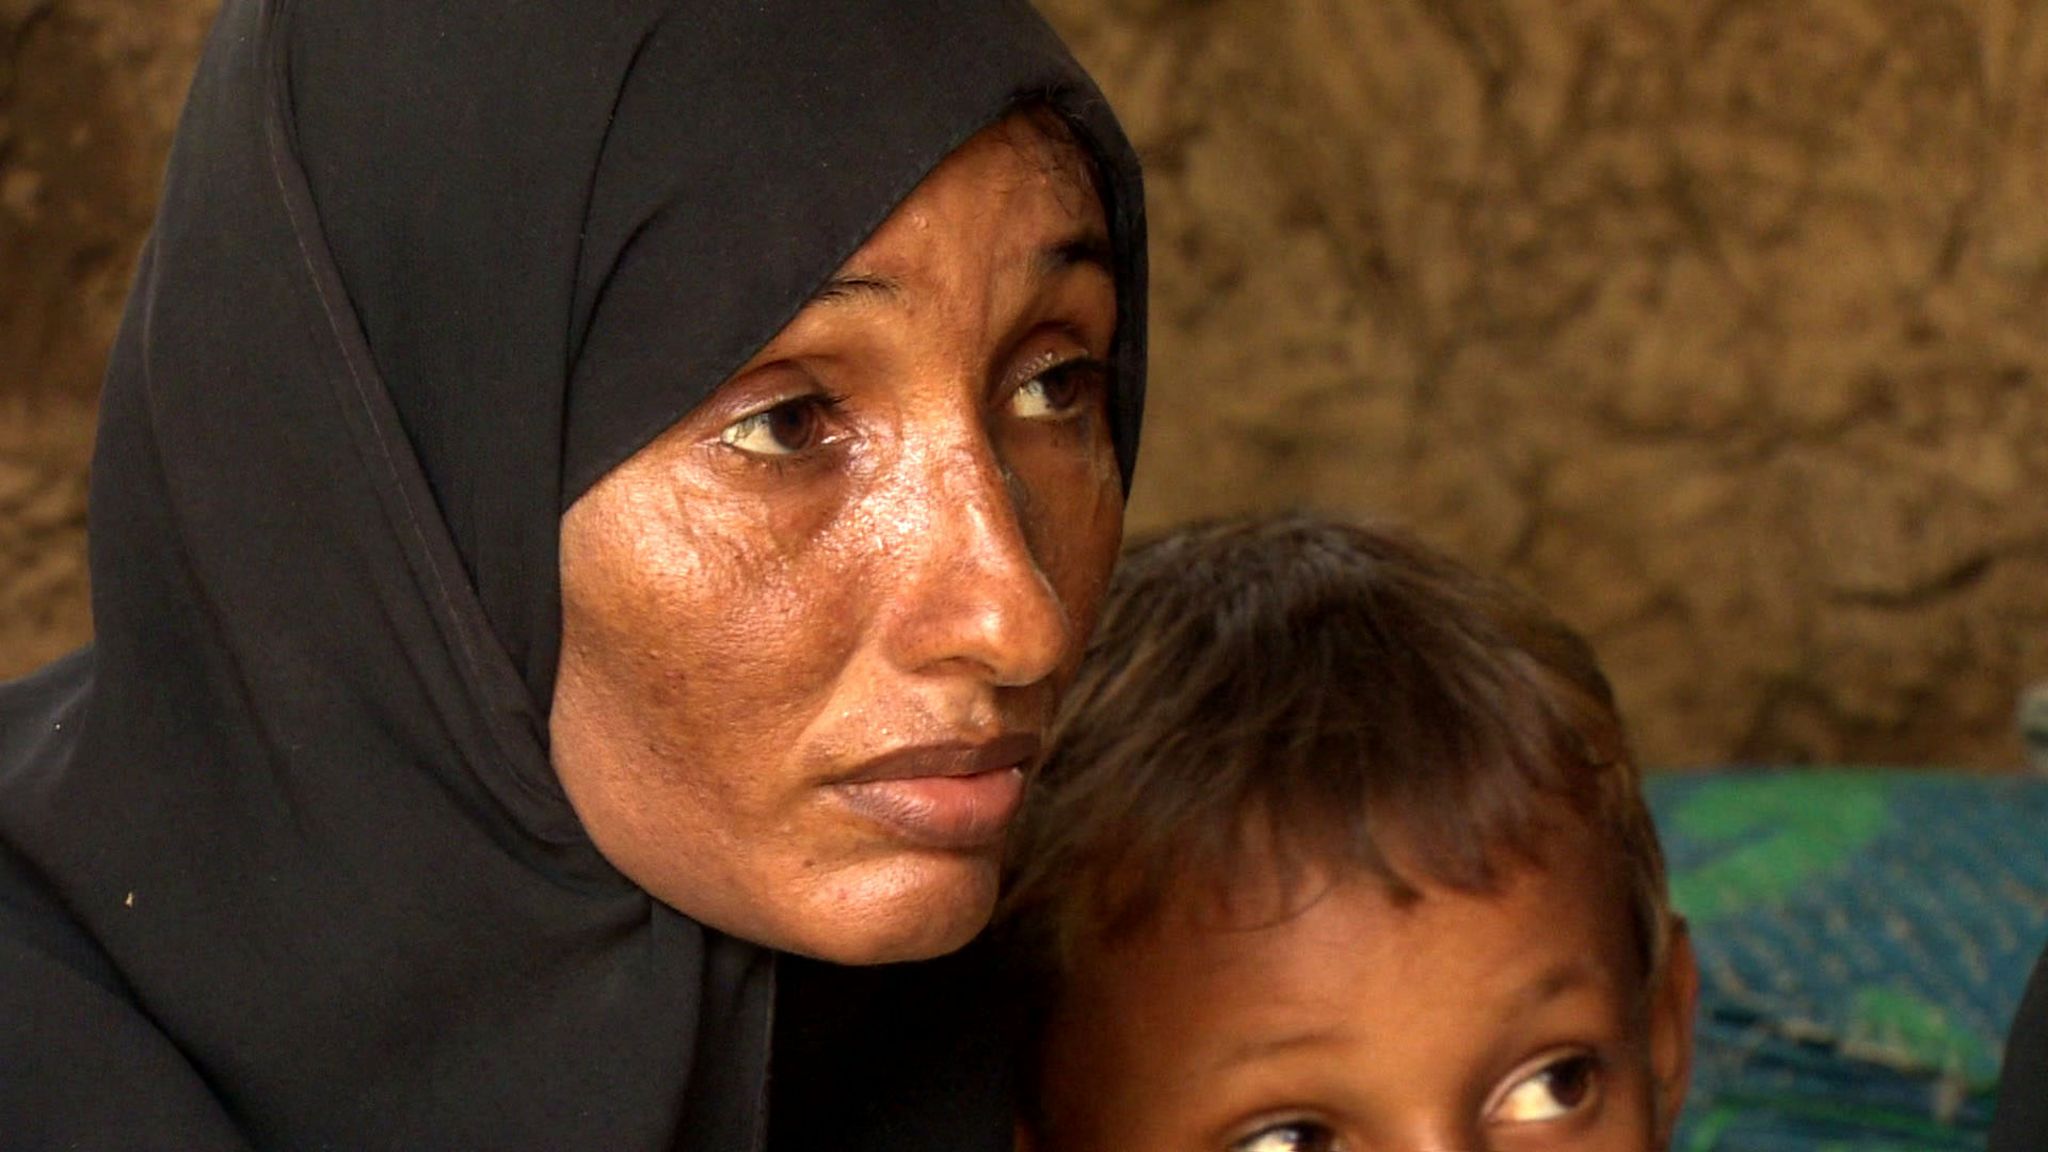 A Yemeni woman displaced by the crisis